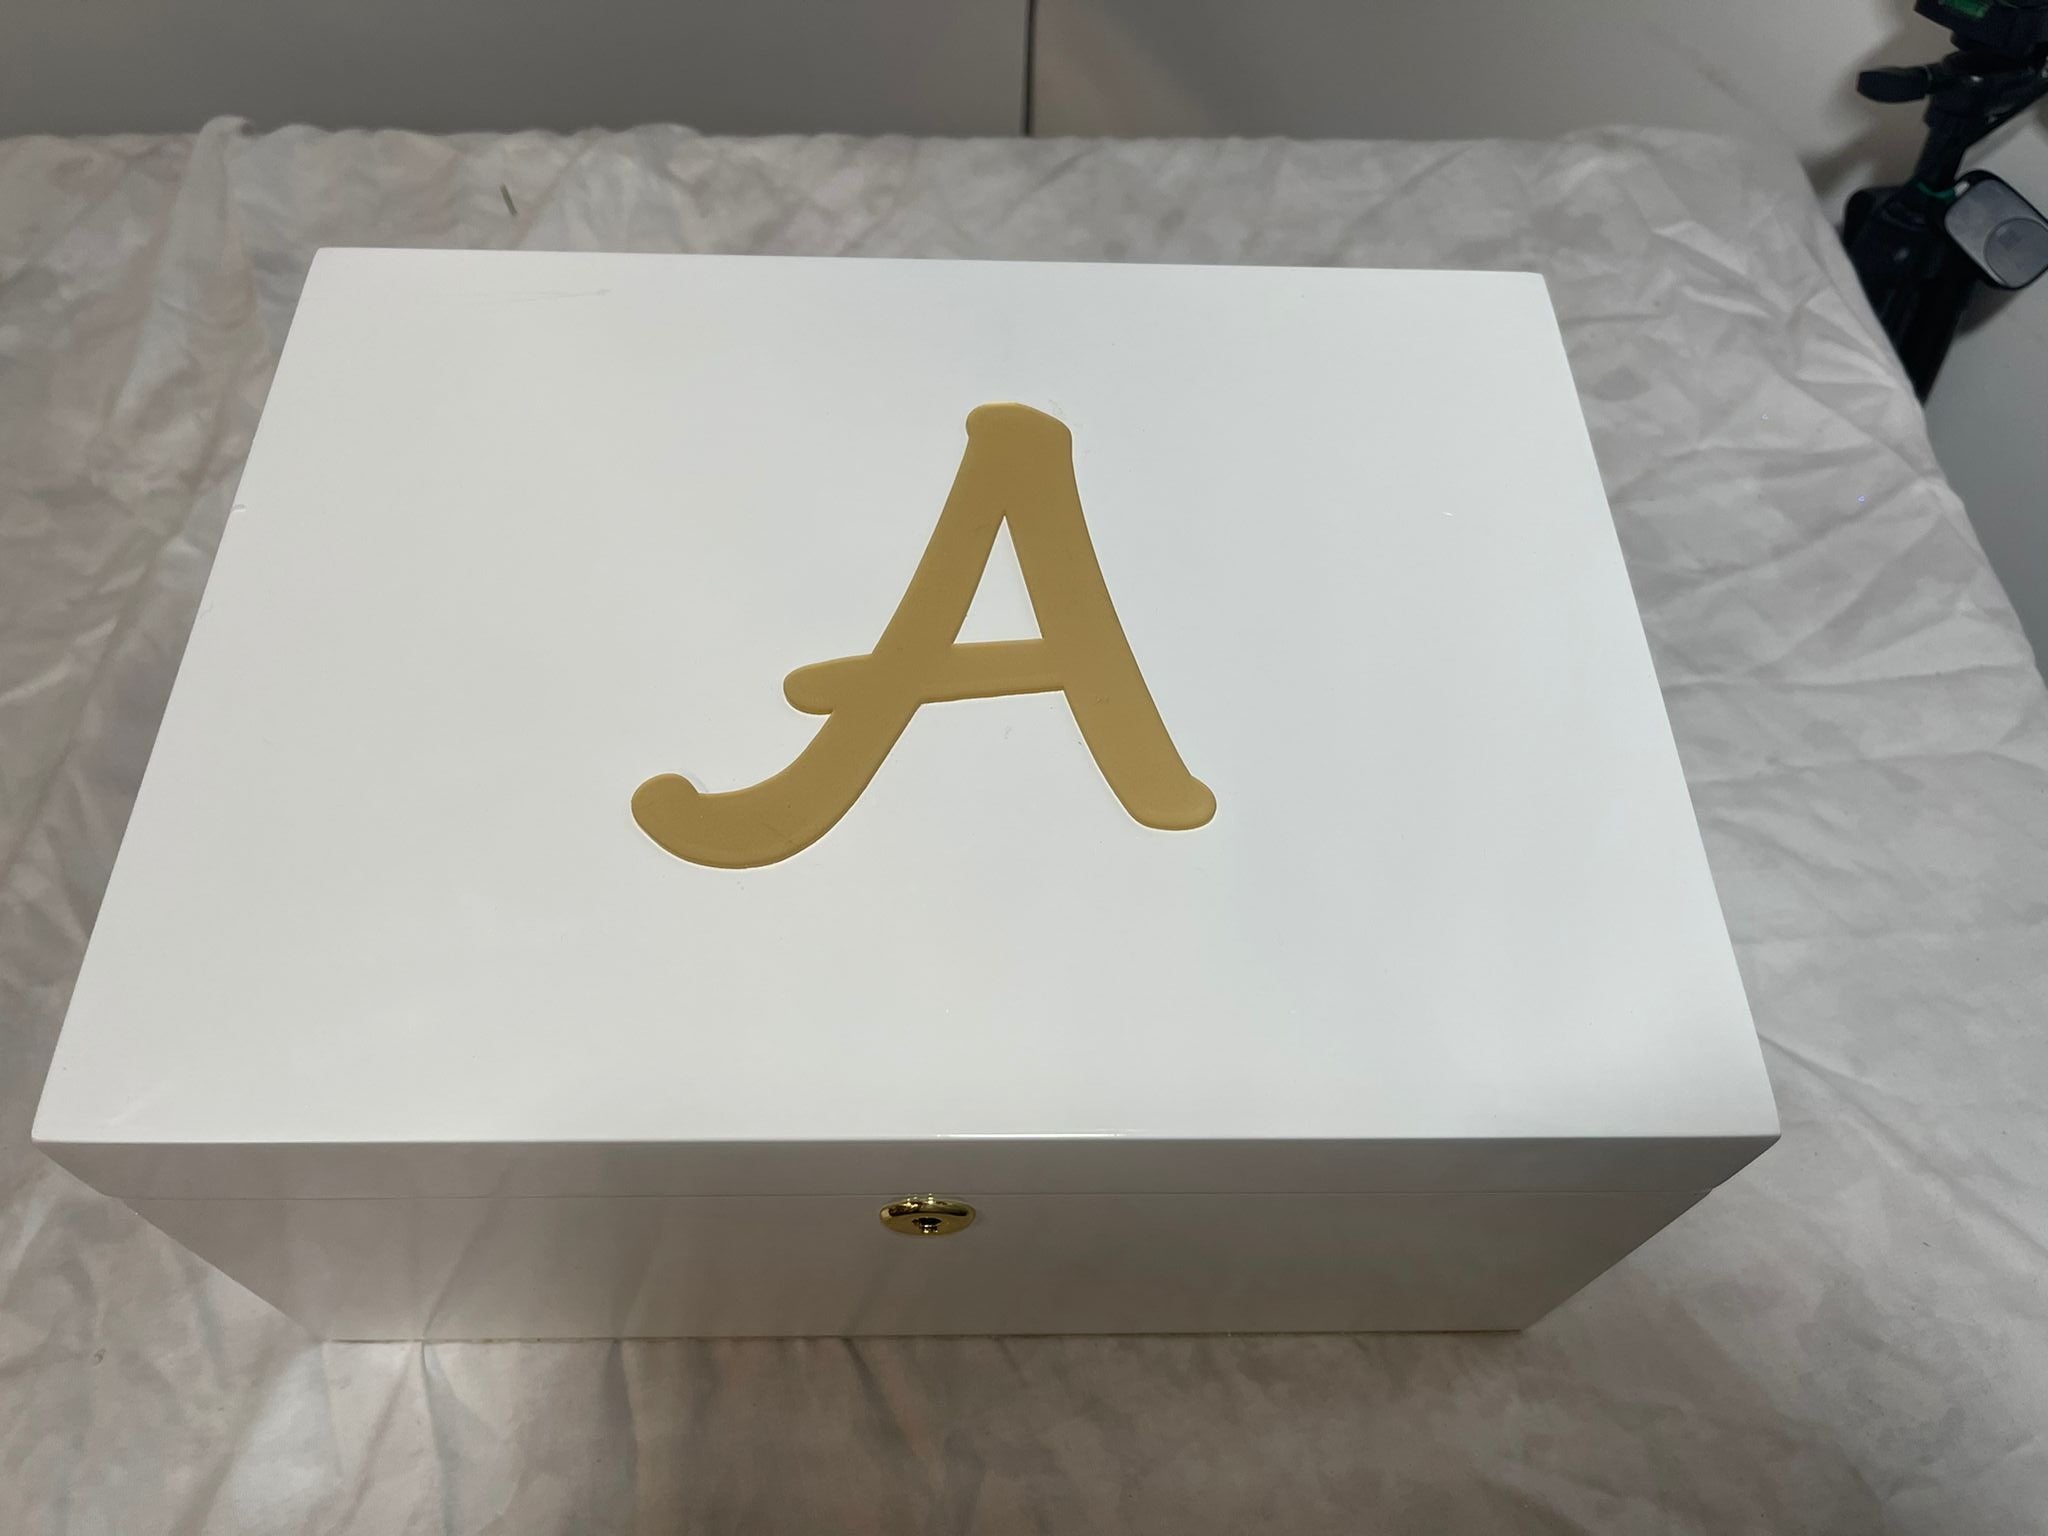 "As is" Personalized White Lacquer Jewelry Box